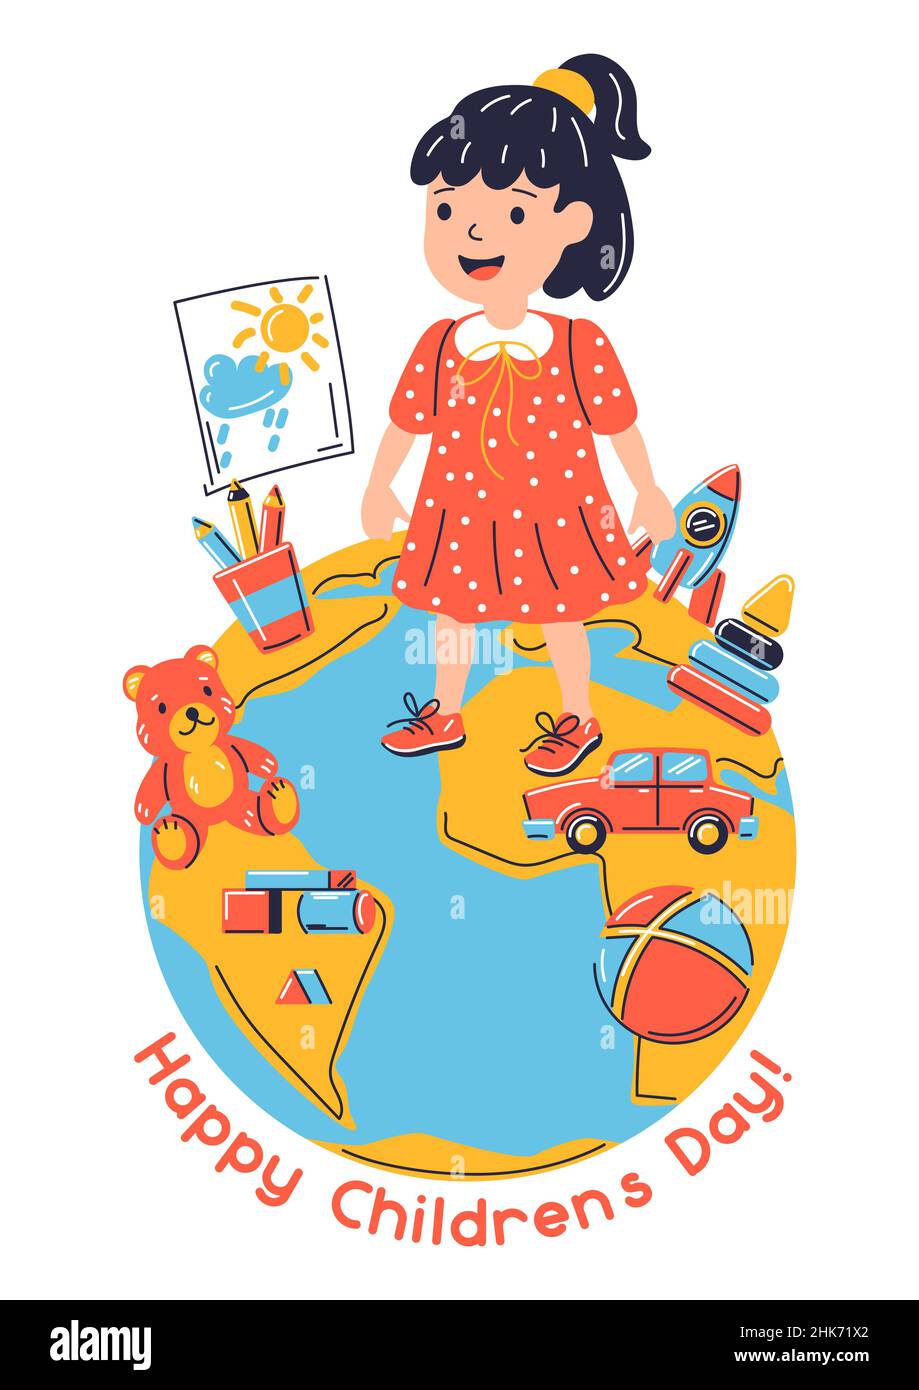 Happy children day greeting card. Illustration of standing on earth smiling girl. Child in cartoon style. Stock Vector